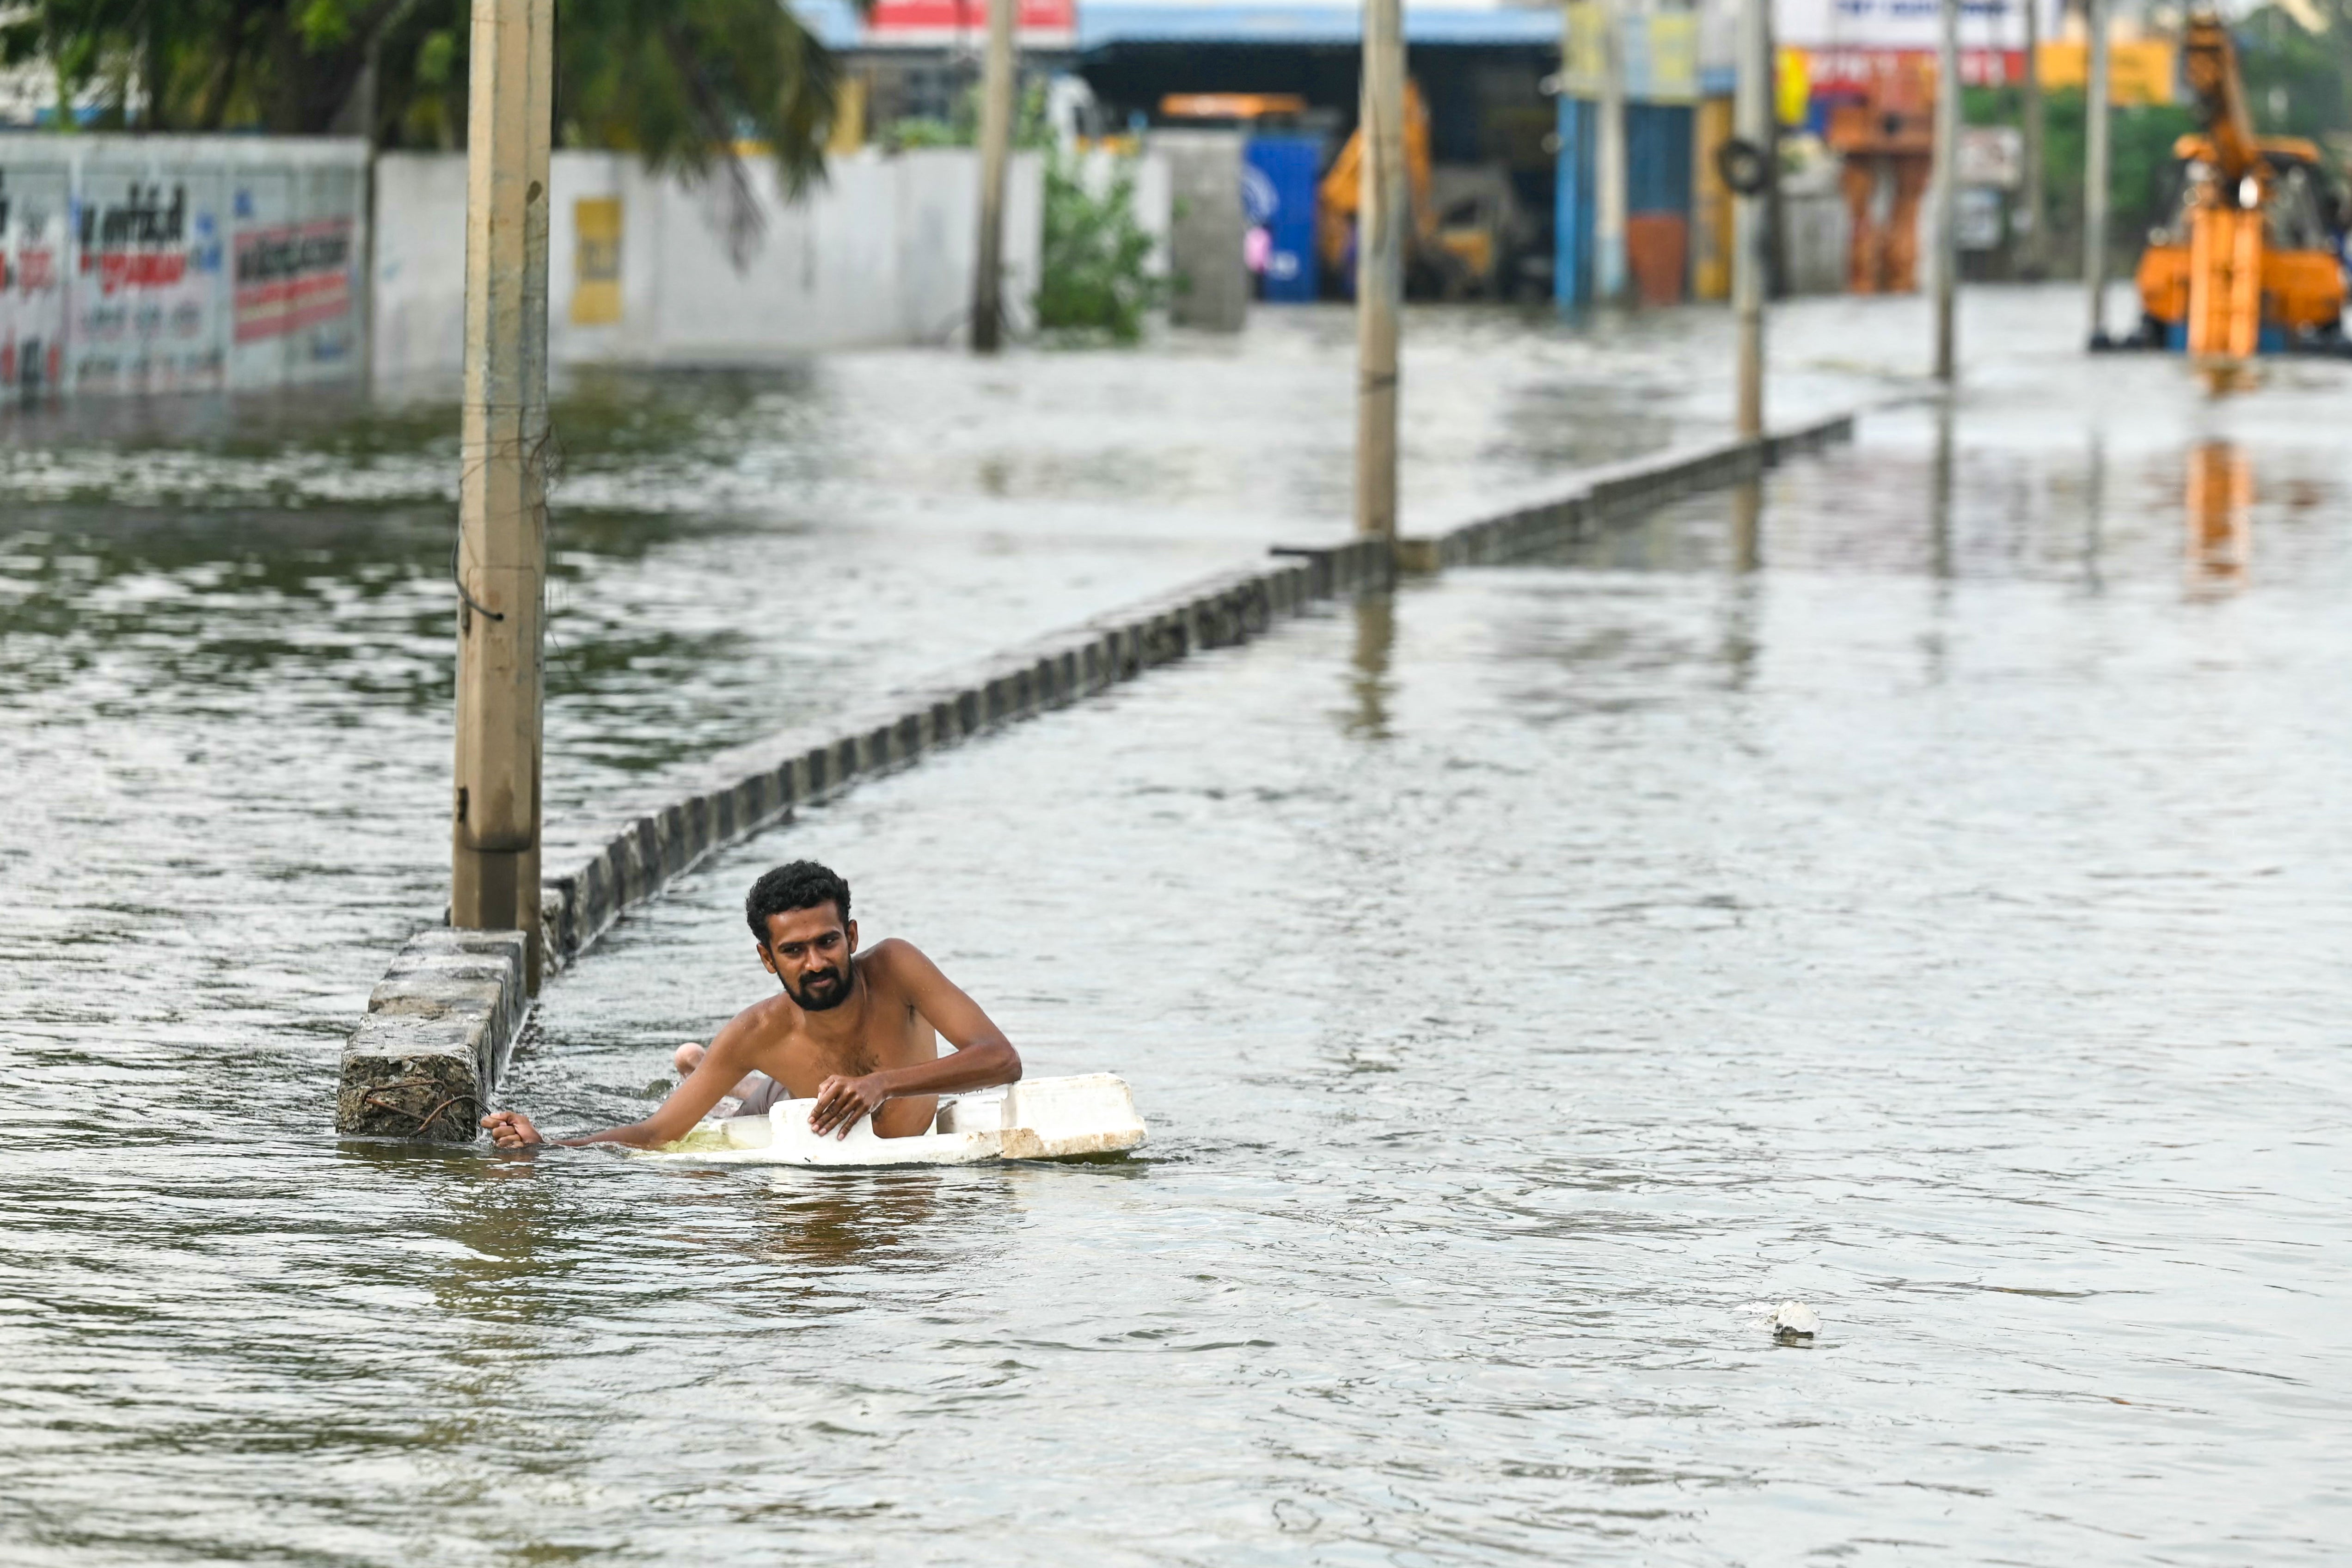 A man wades across a flooded street after heavy rains in Chennai